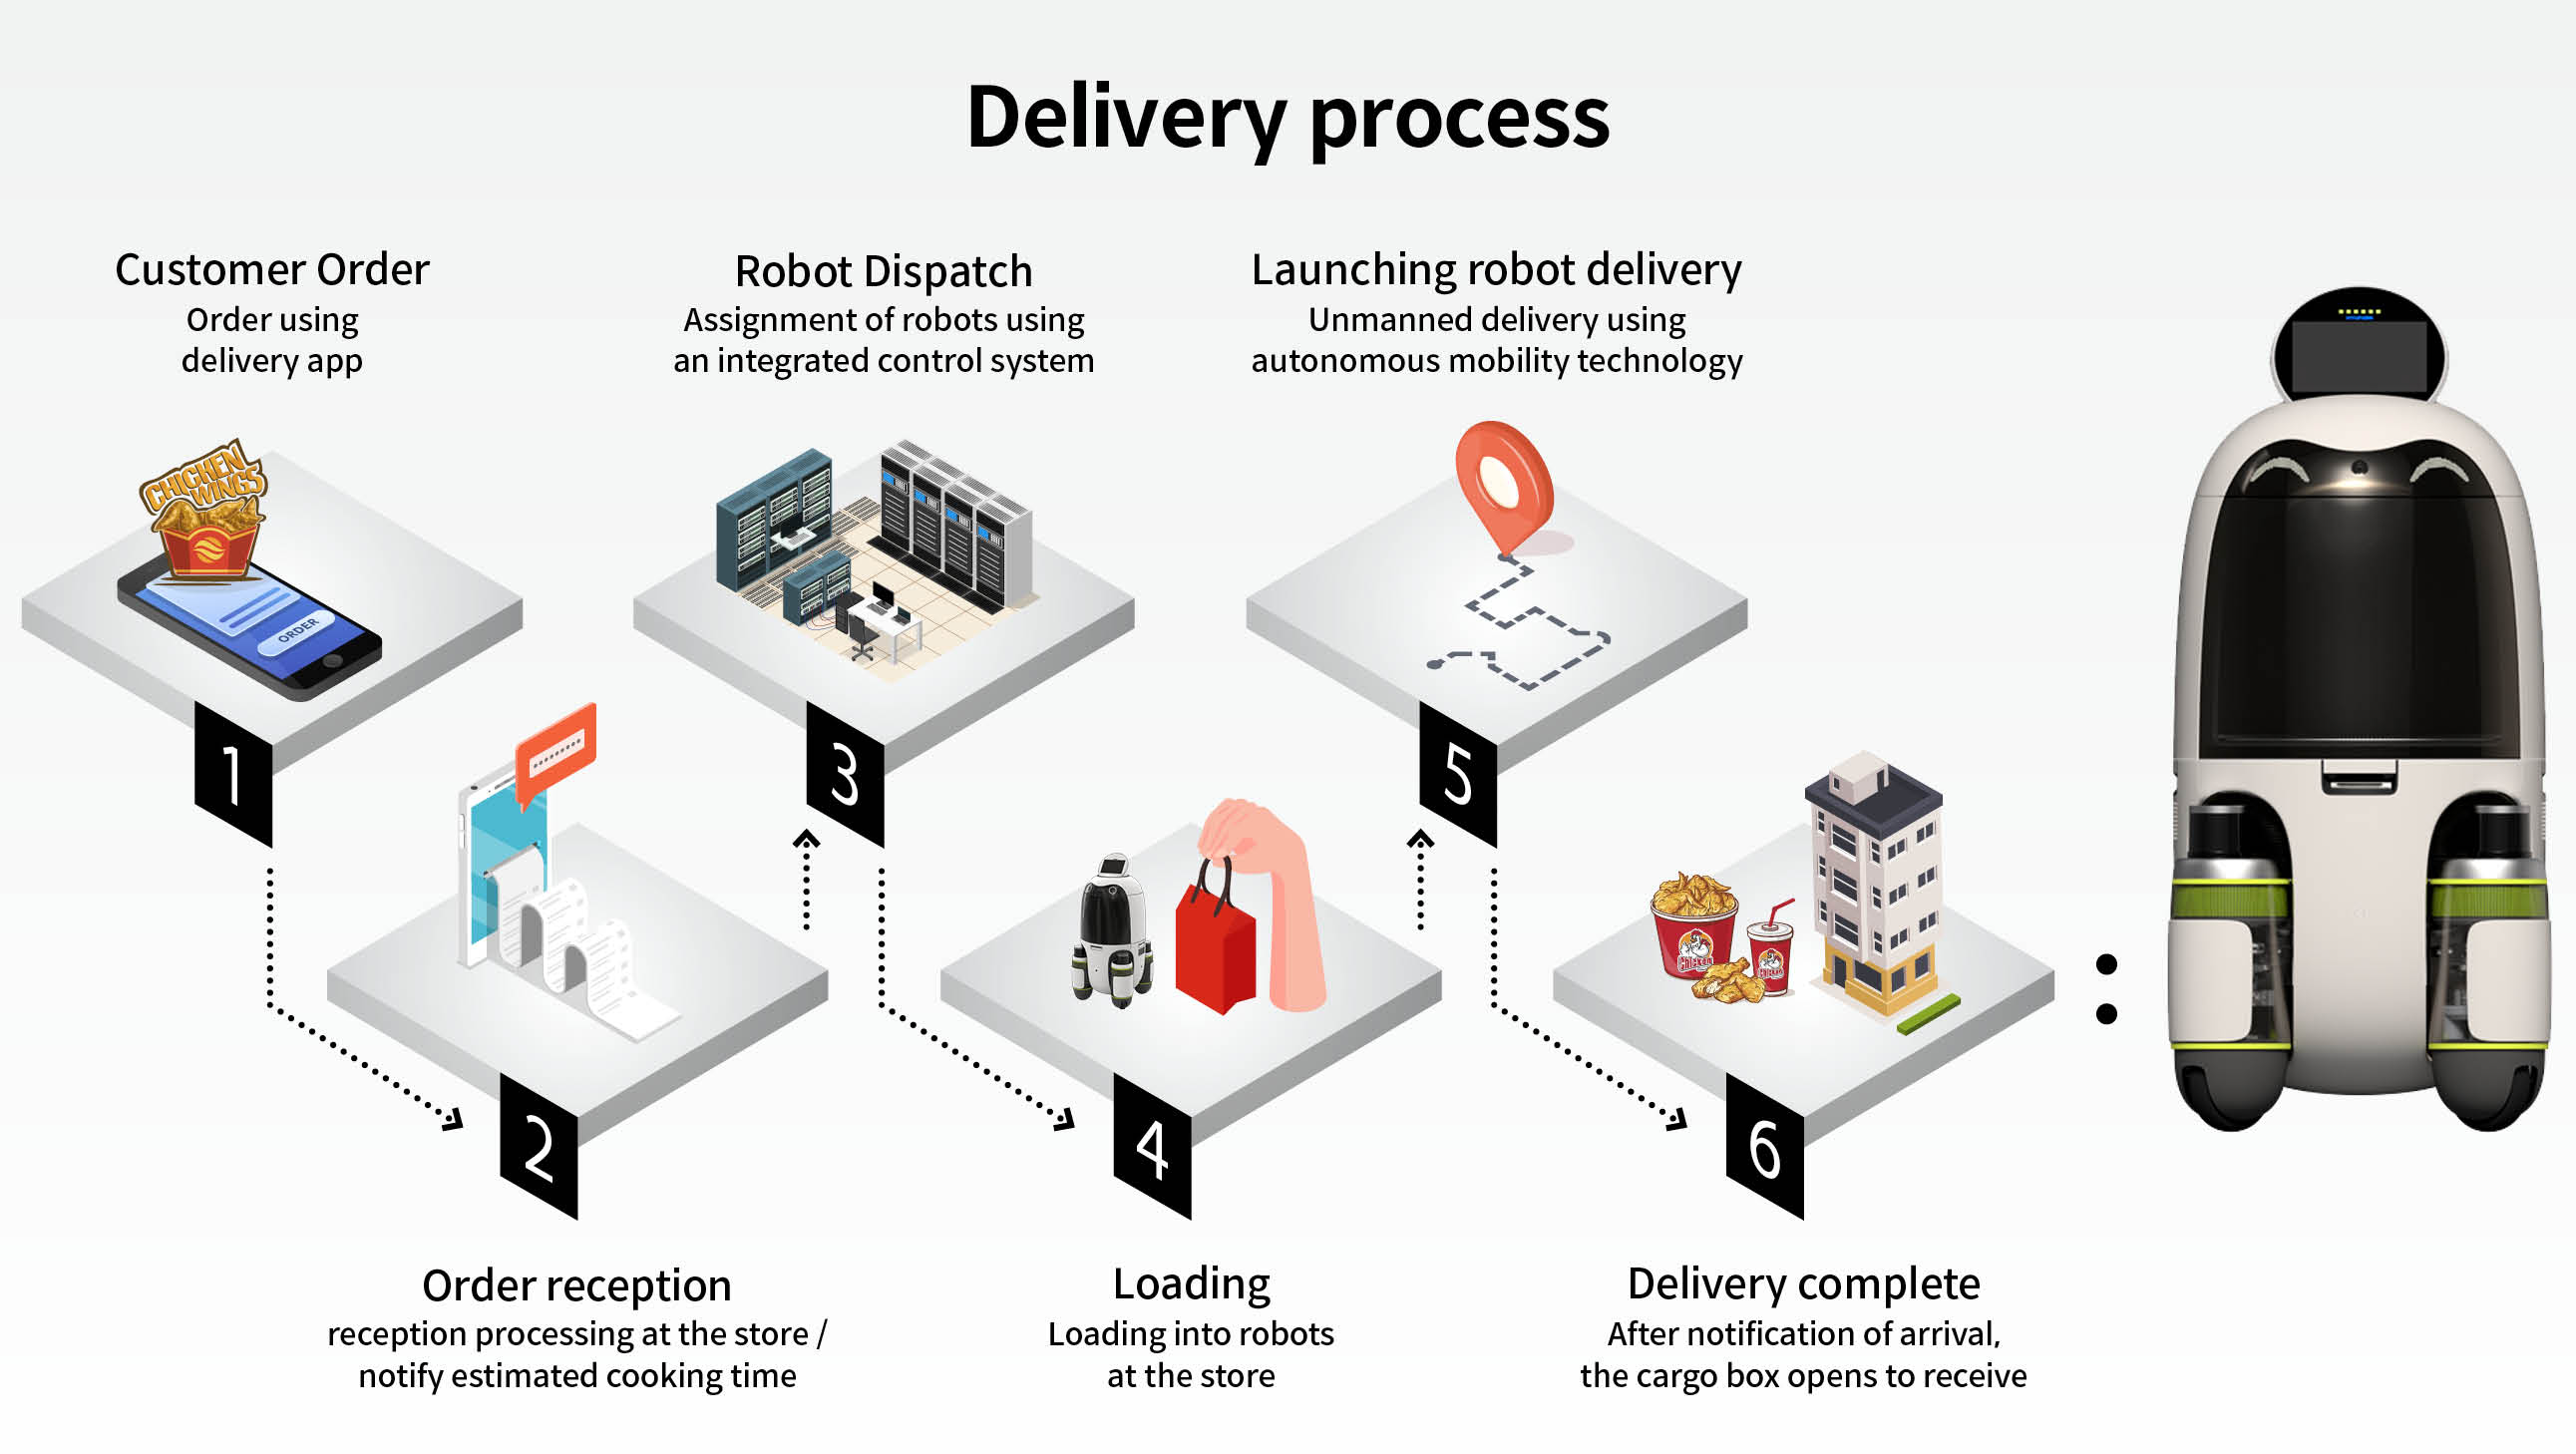 Illustration of a person taking items out of a delivery robot